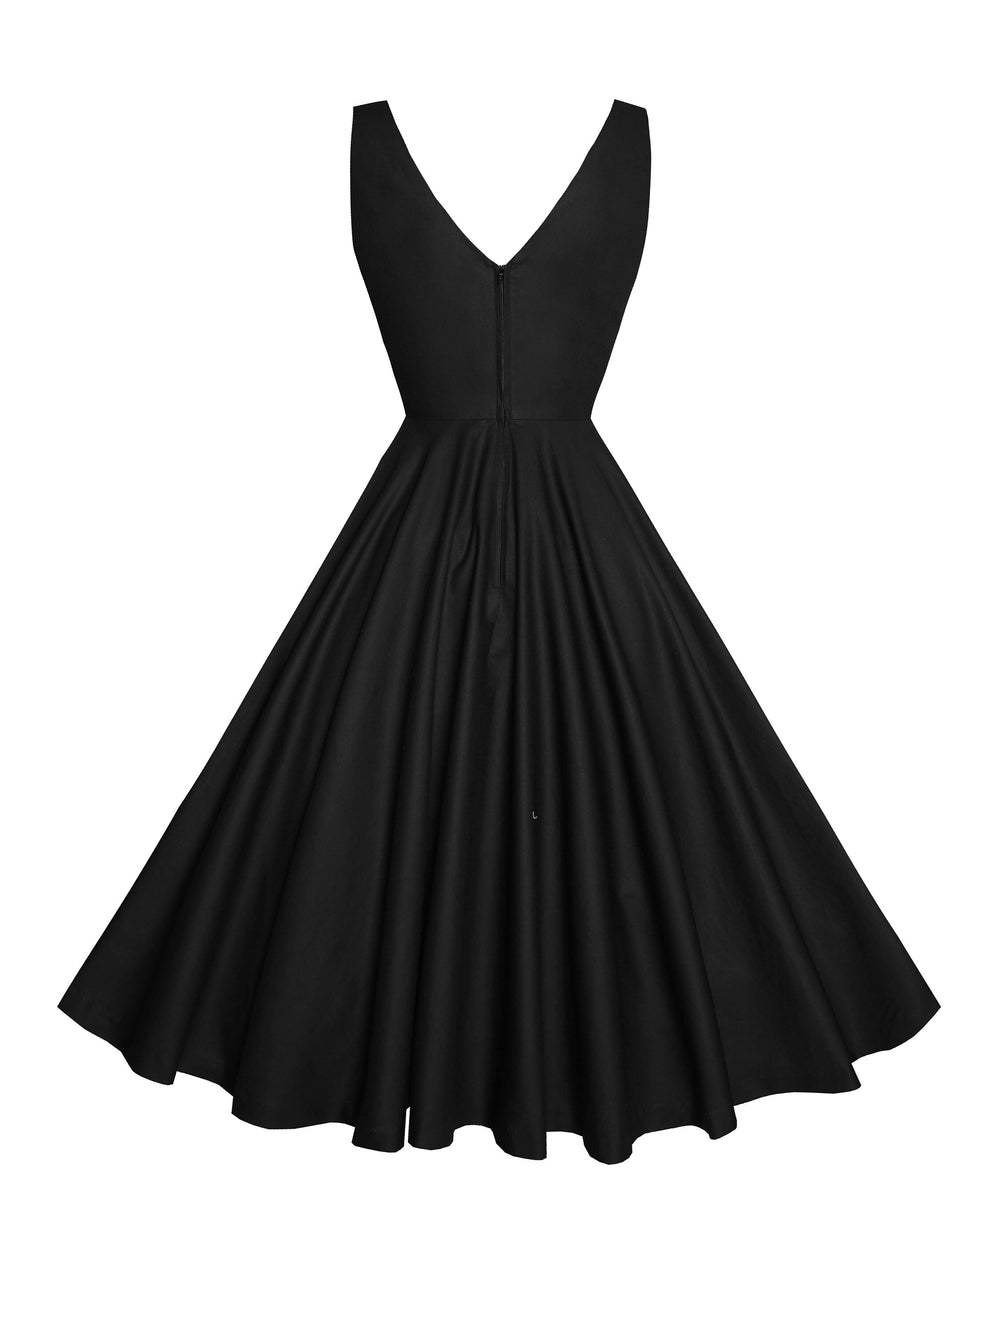 RTS - Size S - Diana Dress in Raven Black Cotton